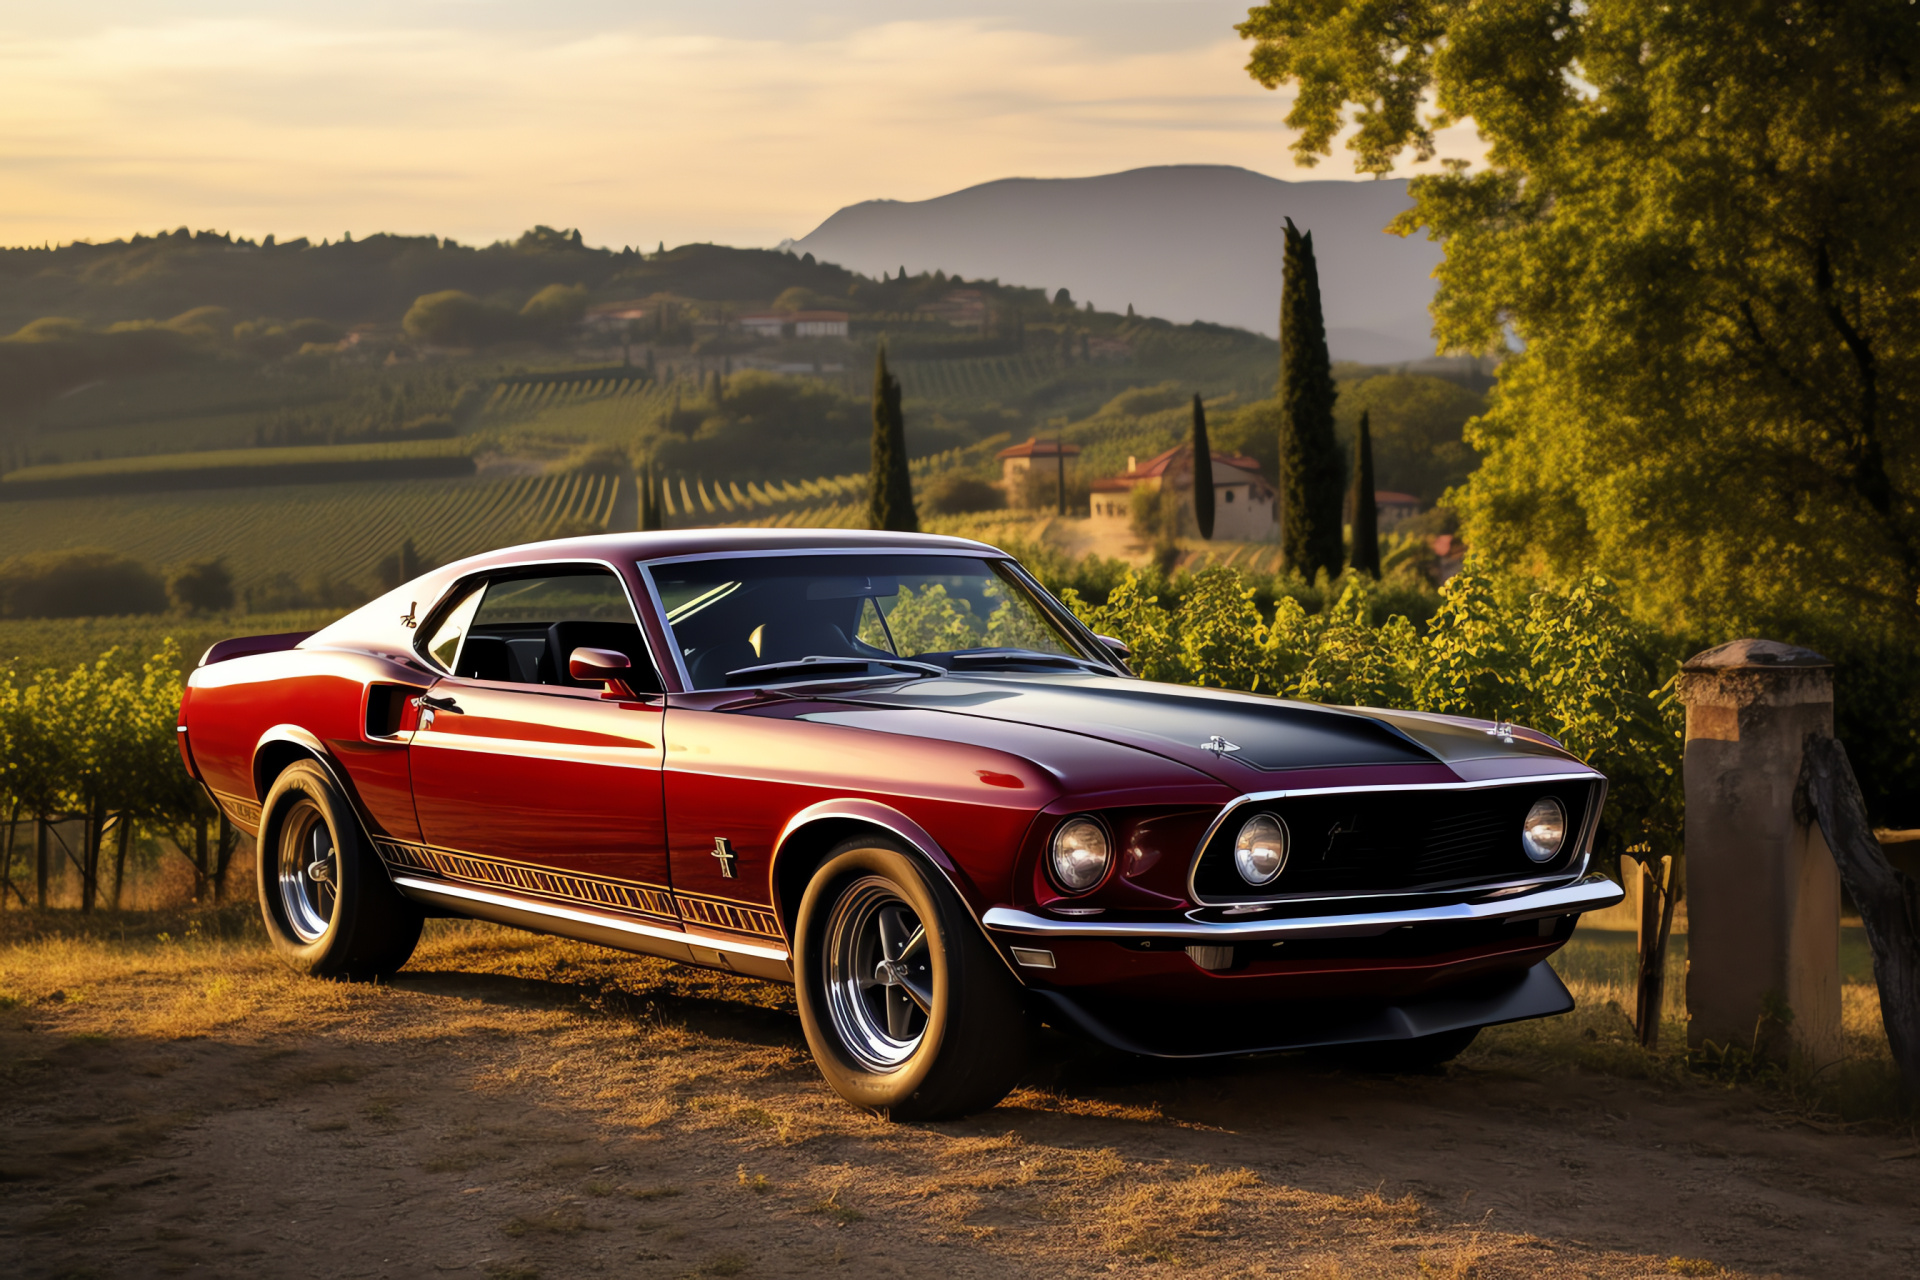 Mach 1 Ford Mustang, Idyllic Tuscan landscape, Muscle car close-up, Undulating Italian topography, Vineyard agricultural tableau, HD Desktop Image